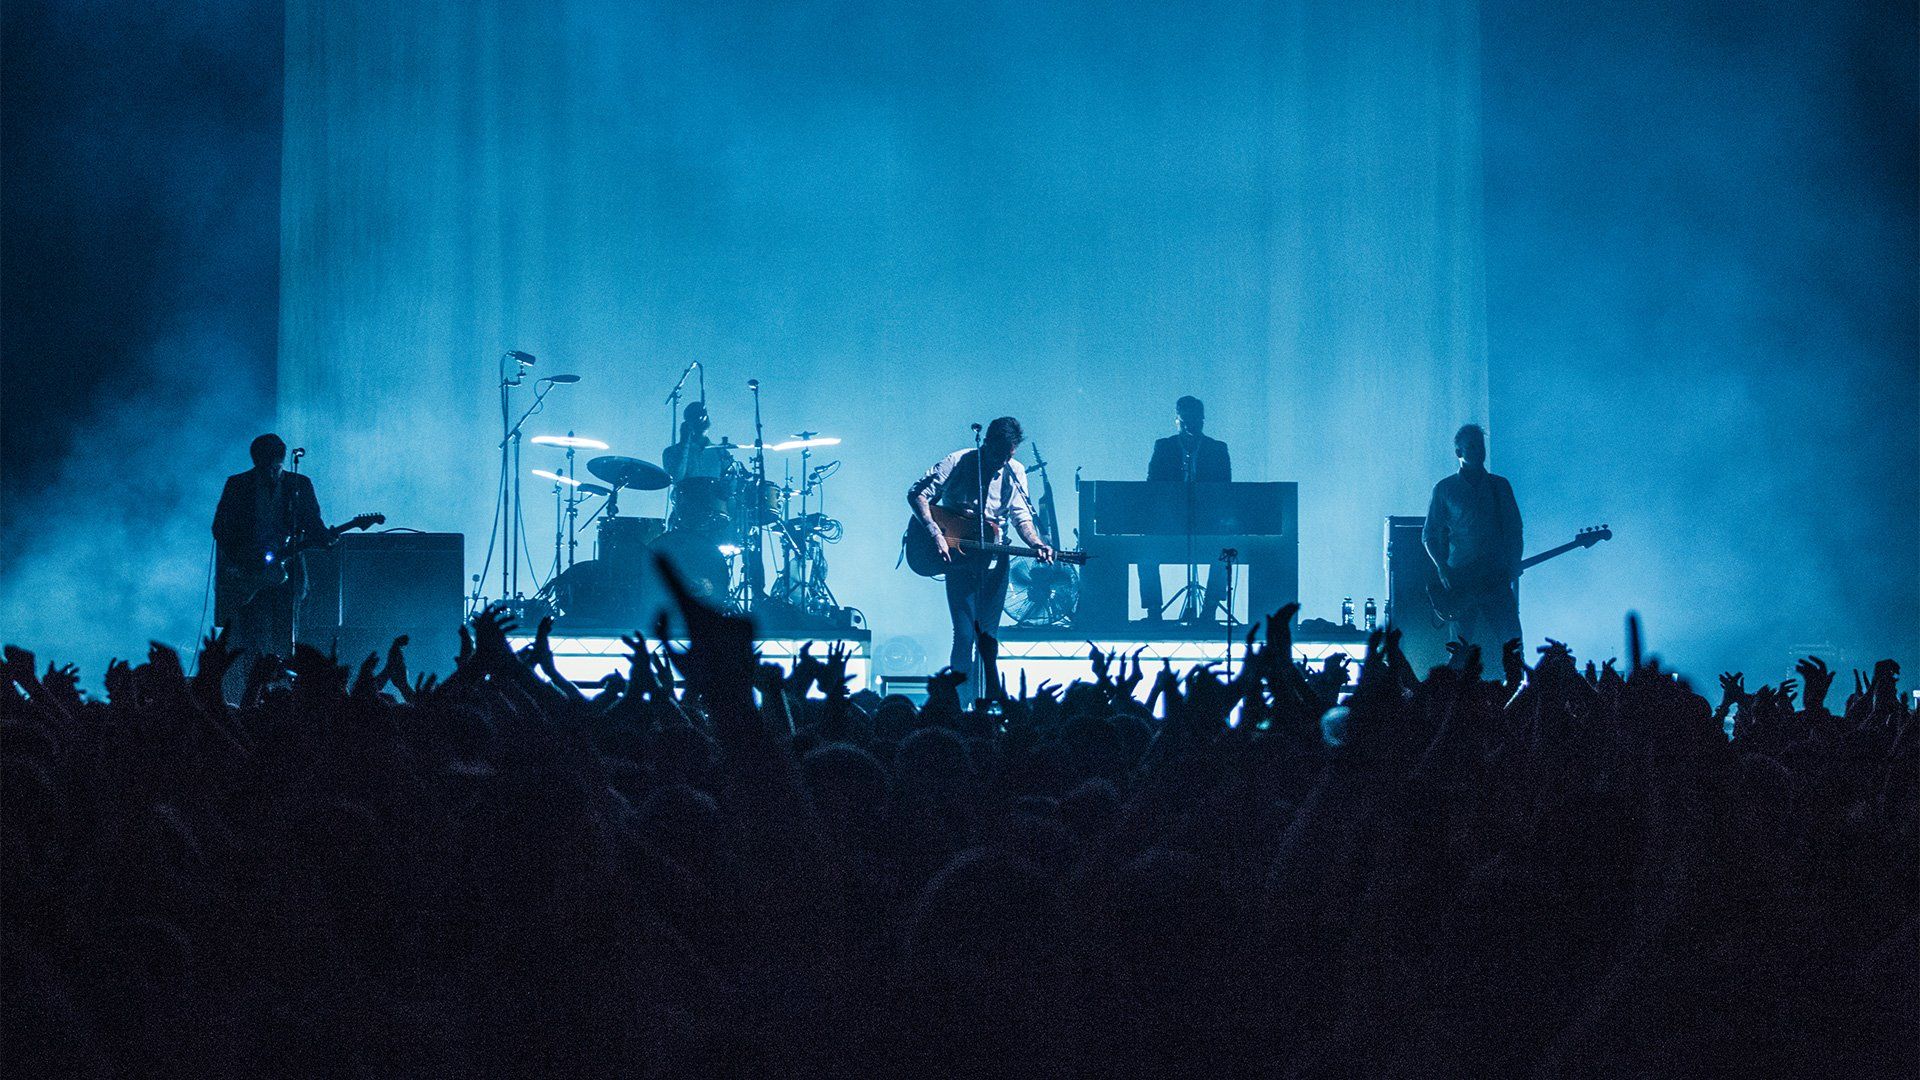 A band play on an atmospheric stage at night, with smoke and blue light, and hands in the foreground. Photo by Ben Morse.